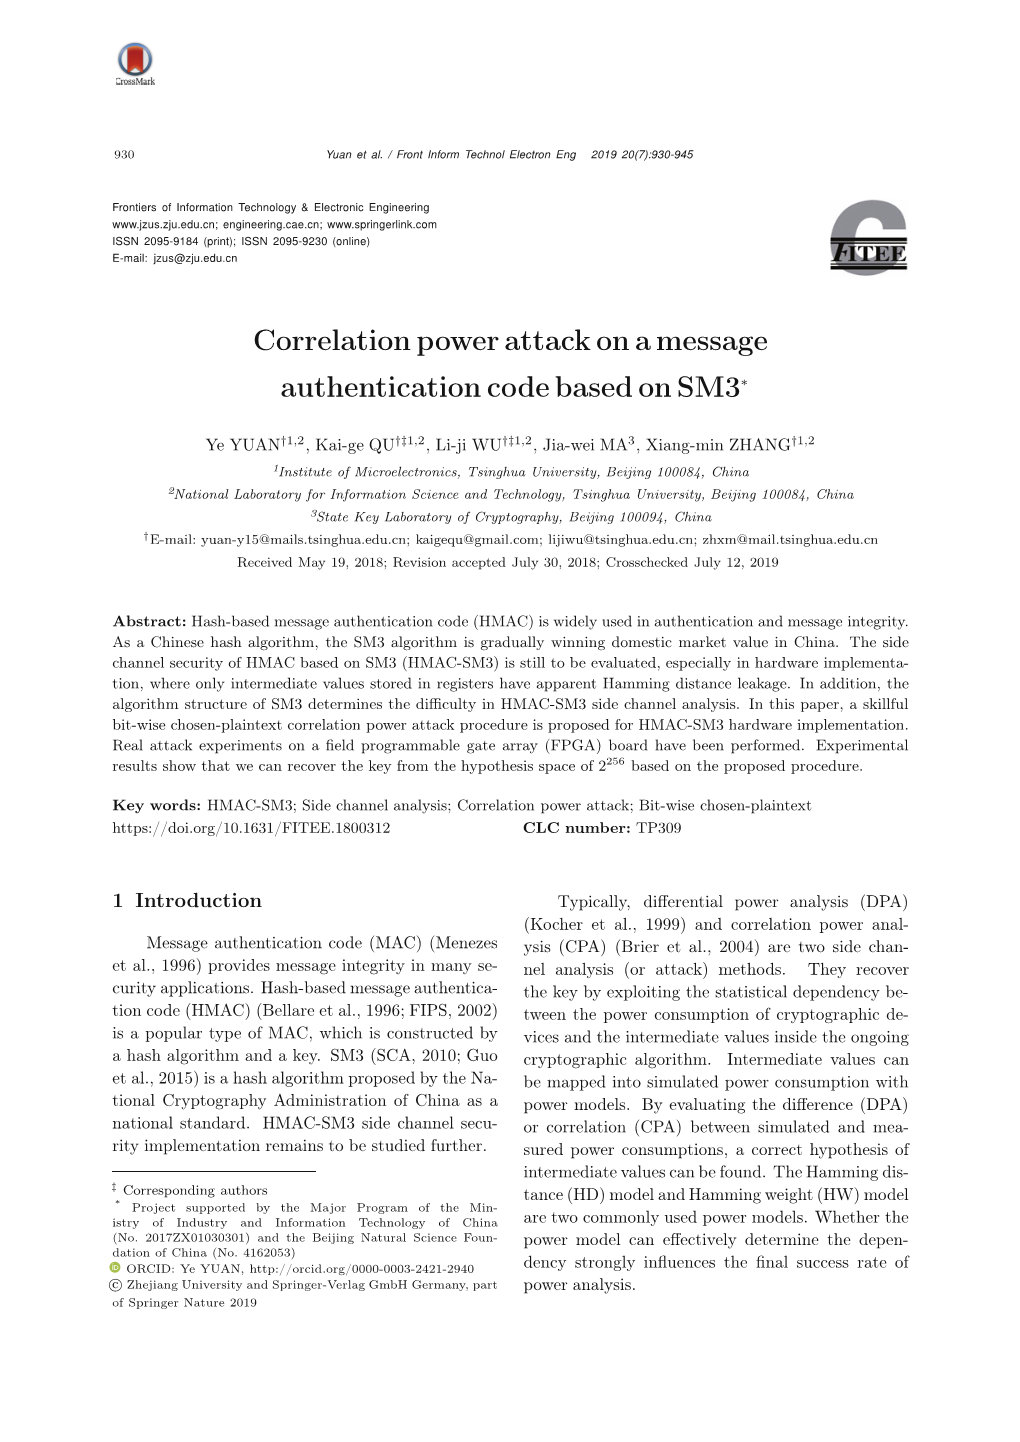 Correlation Power Attack on a Message Authentication Code Based on SM3∗